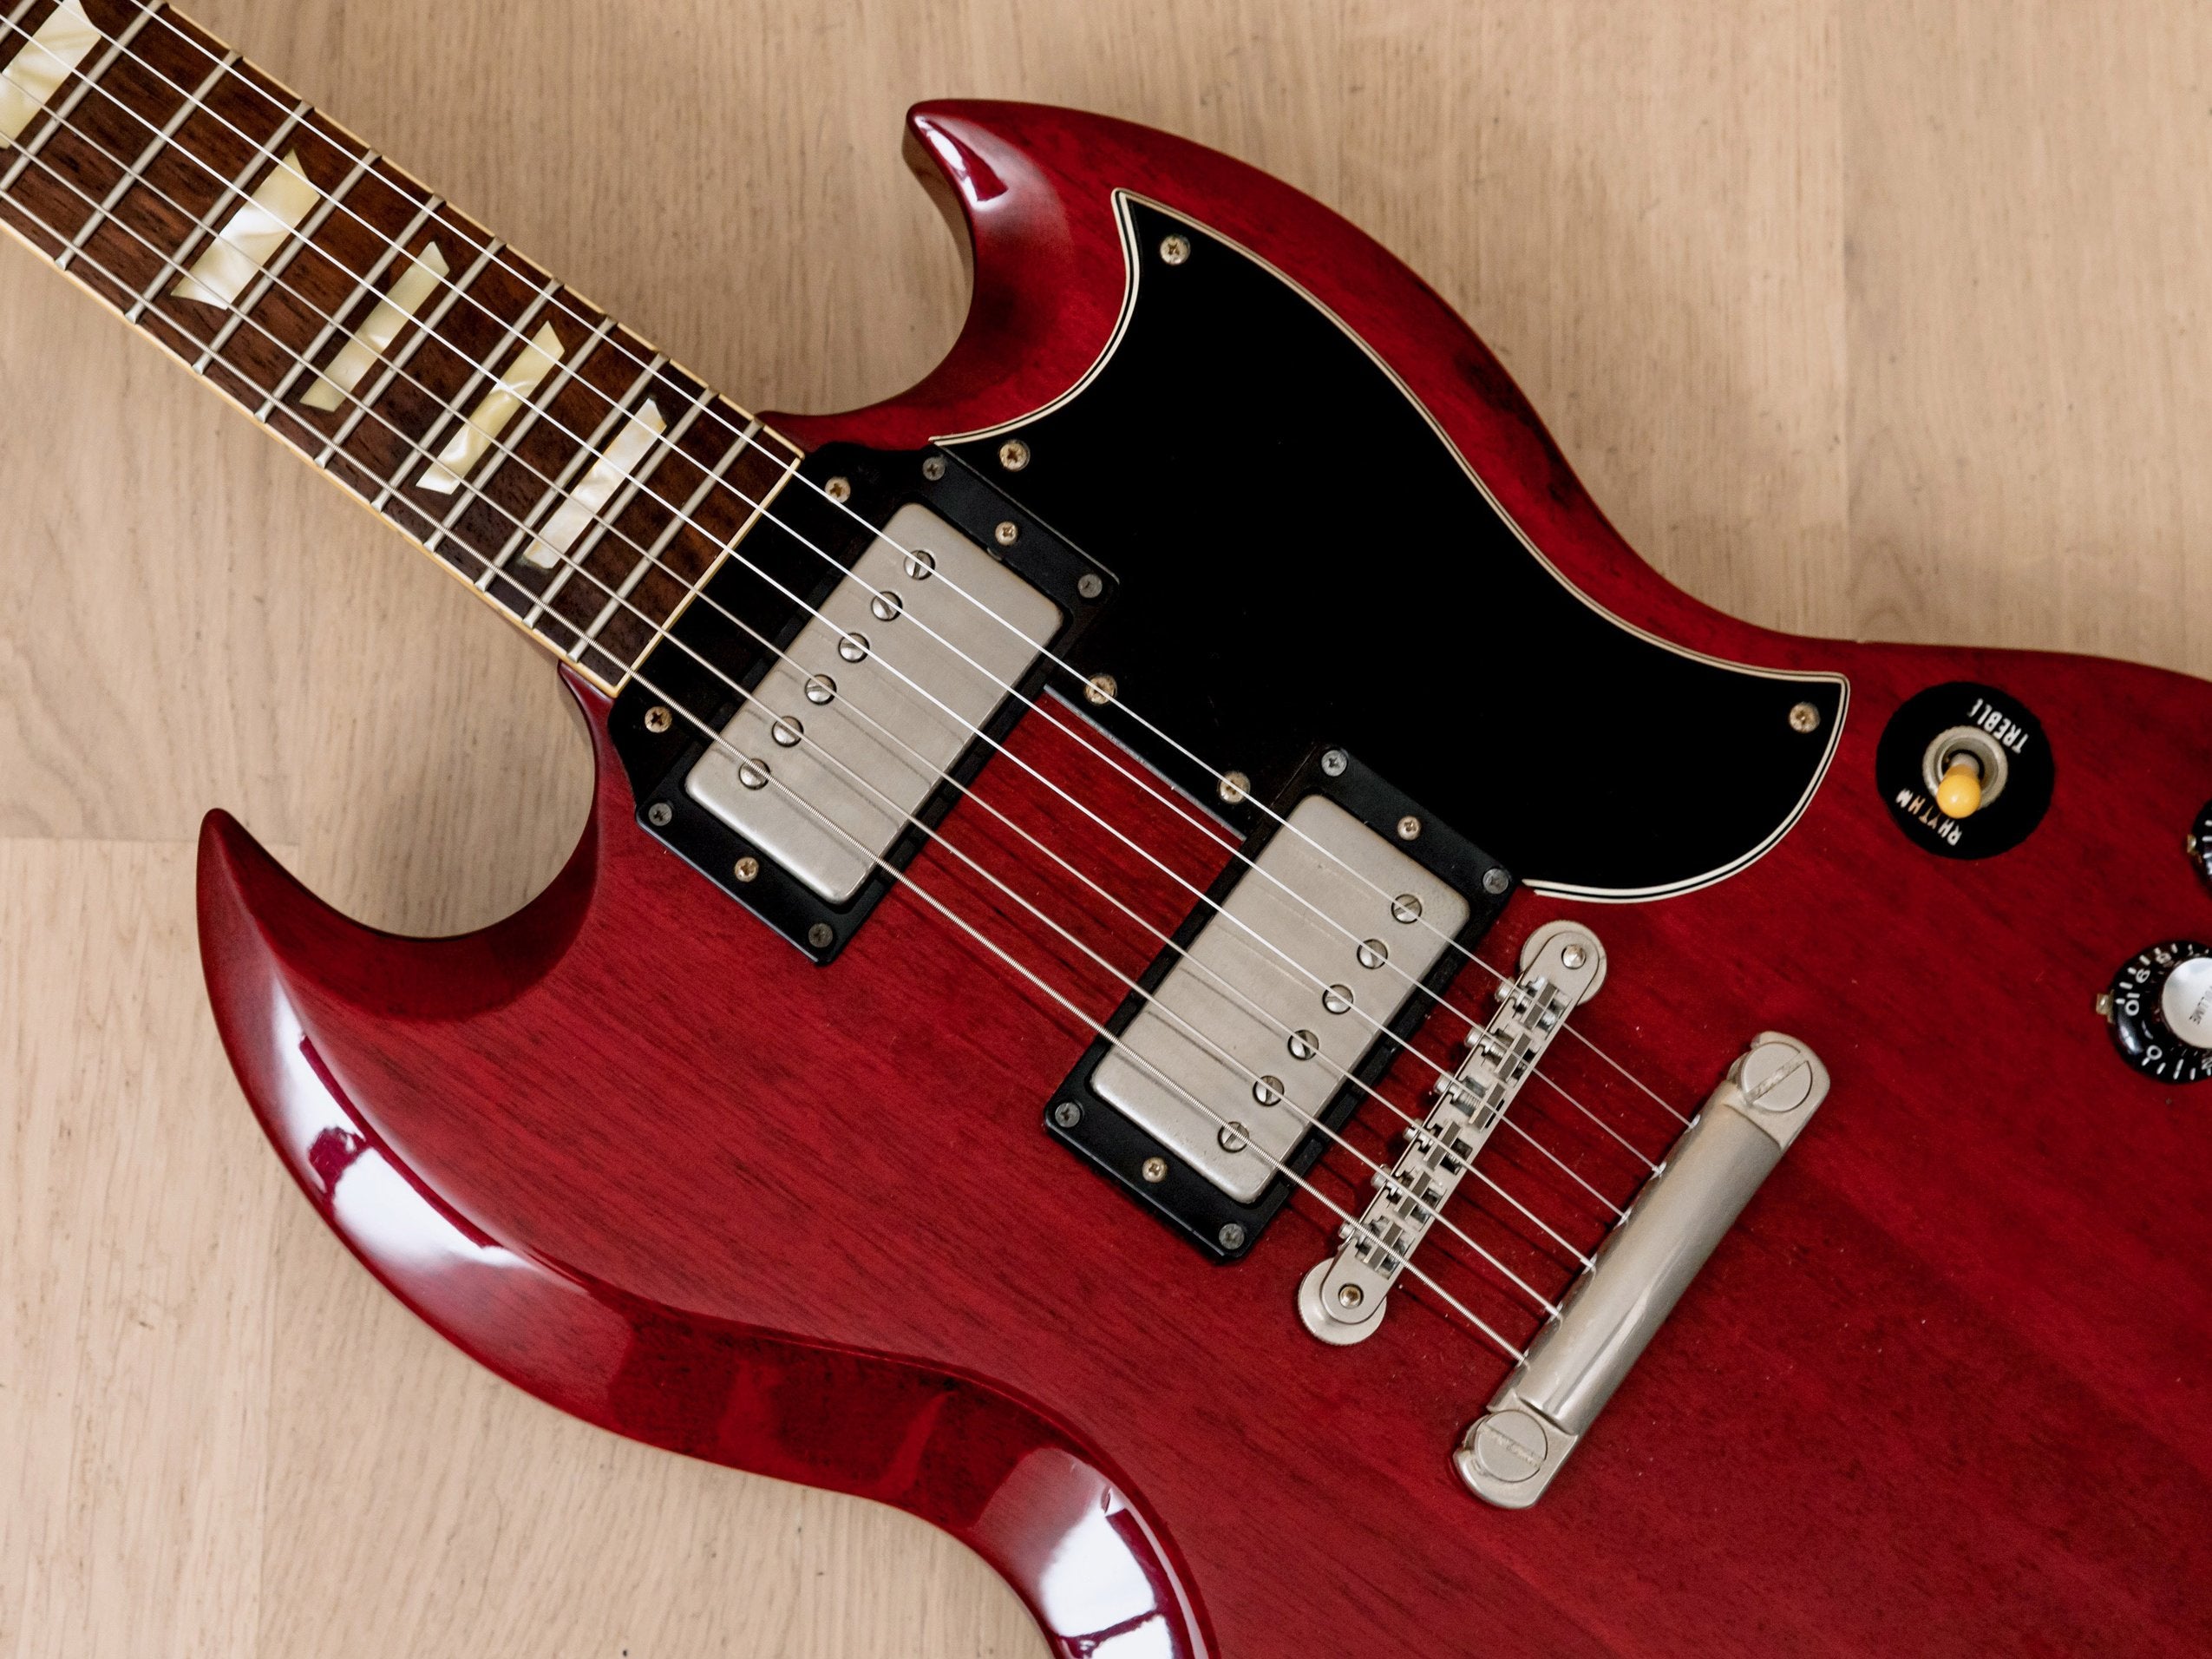 1989 Orville by Gibson '61 SG Standard Heritage Cherry, 100% Original w/ USA Bill Lawrence Humbuckers, Japan